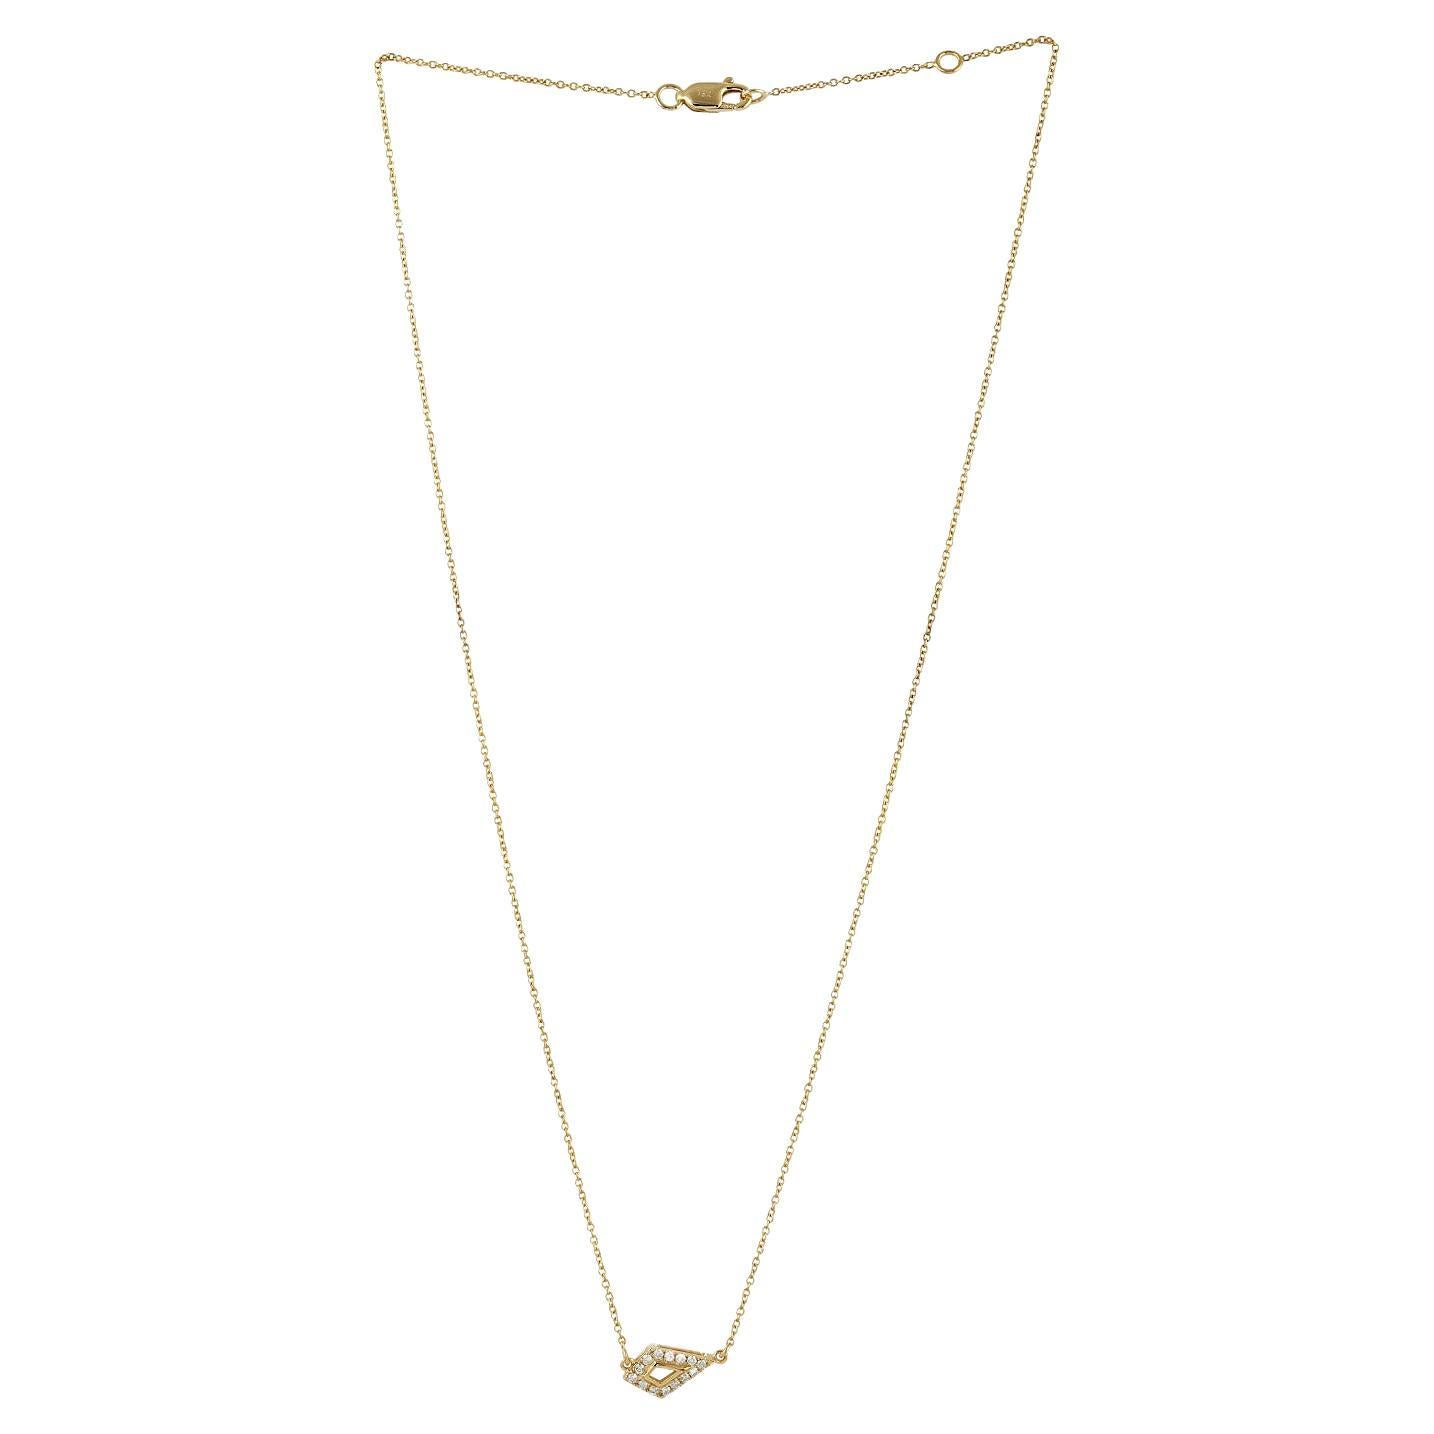 Gemotric Shaped Pave Diamond Pendant Chain Necklace Made In 18k Yellow Gold For Sale